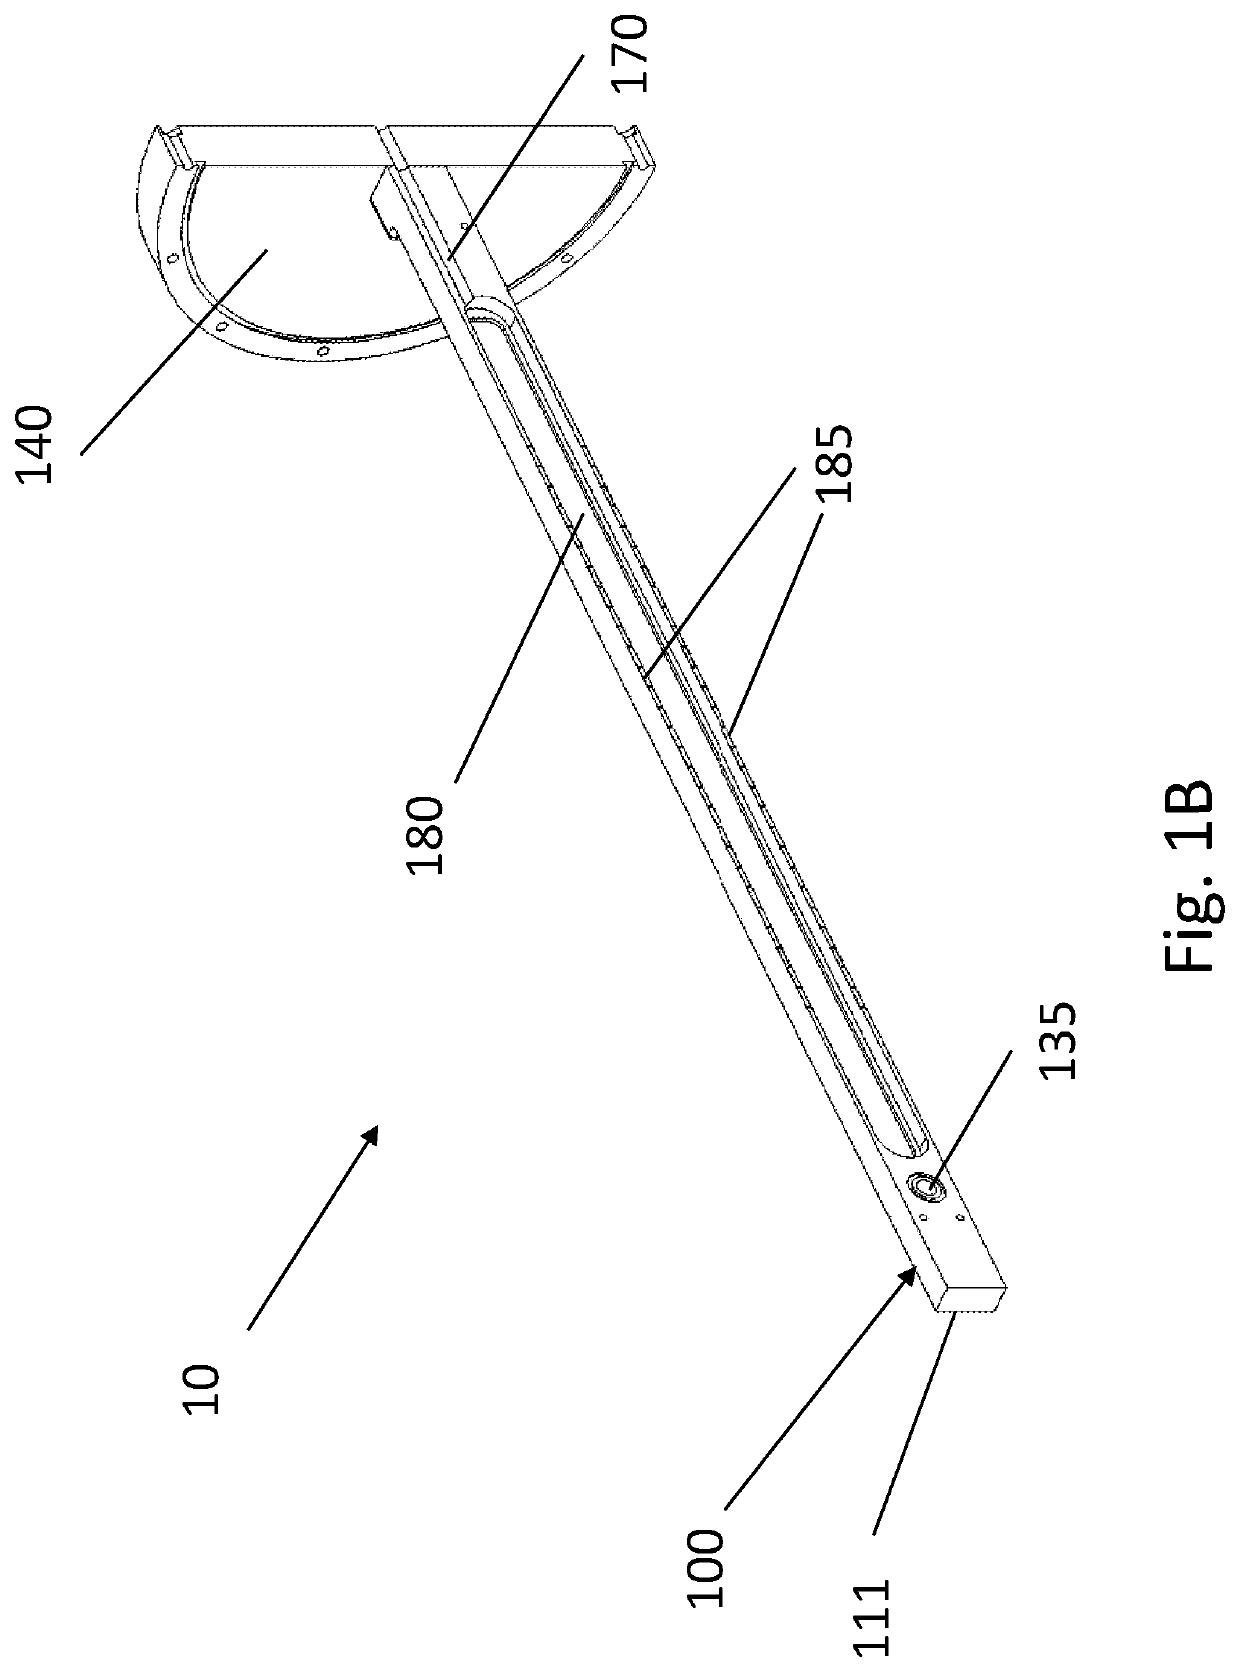 High throughput vacuum deposition sources and system thereof